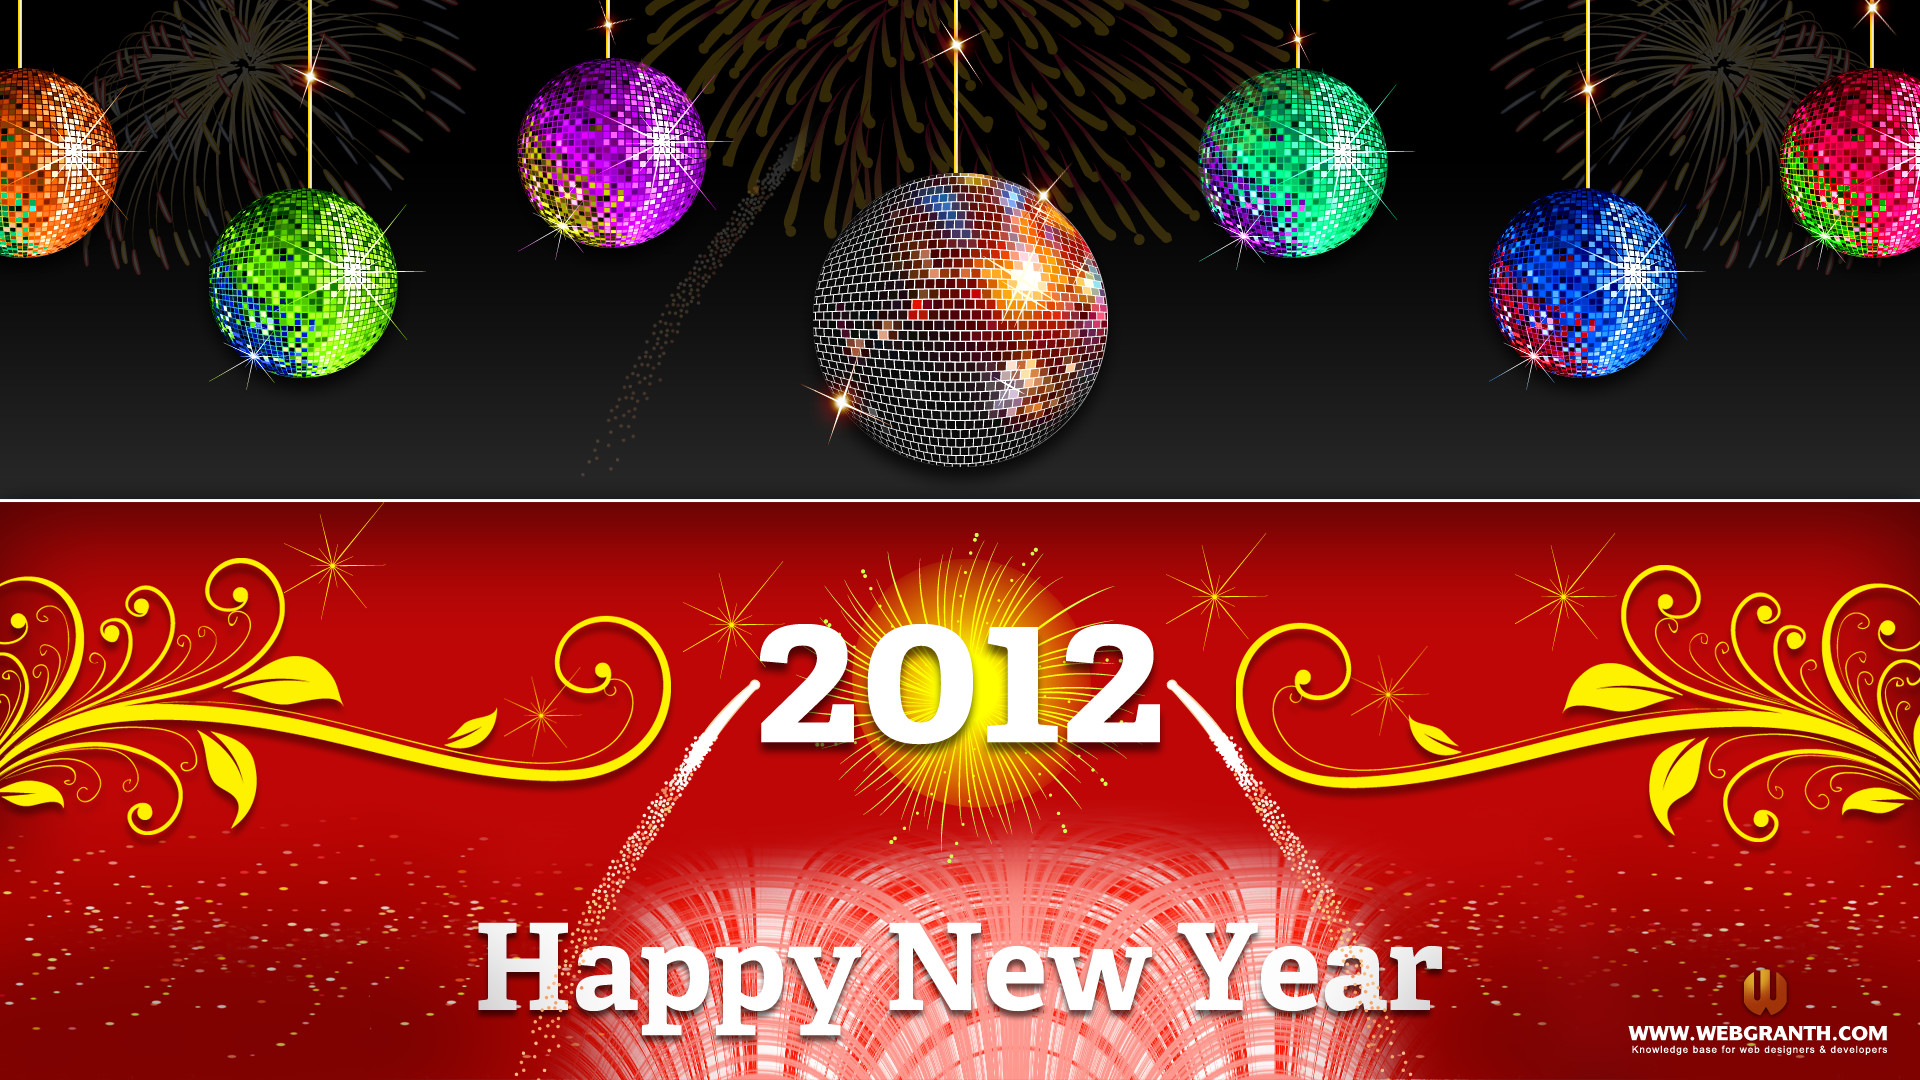 1920x1080 New Years Celebrations Wallpaper 2012. Download. download